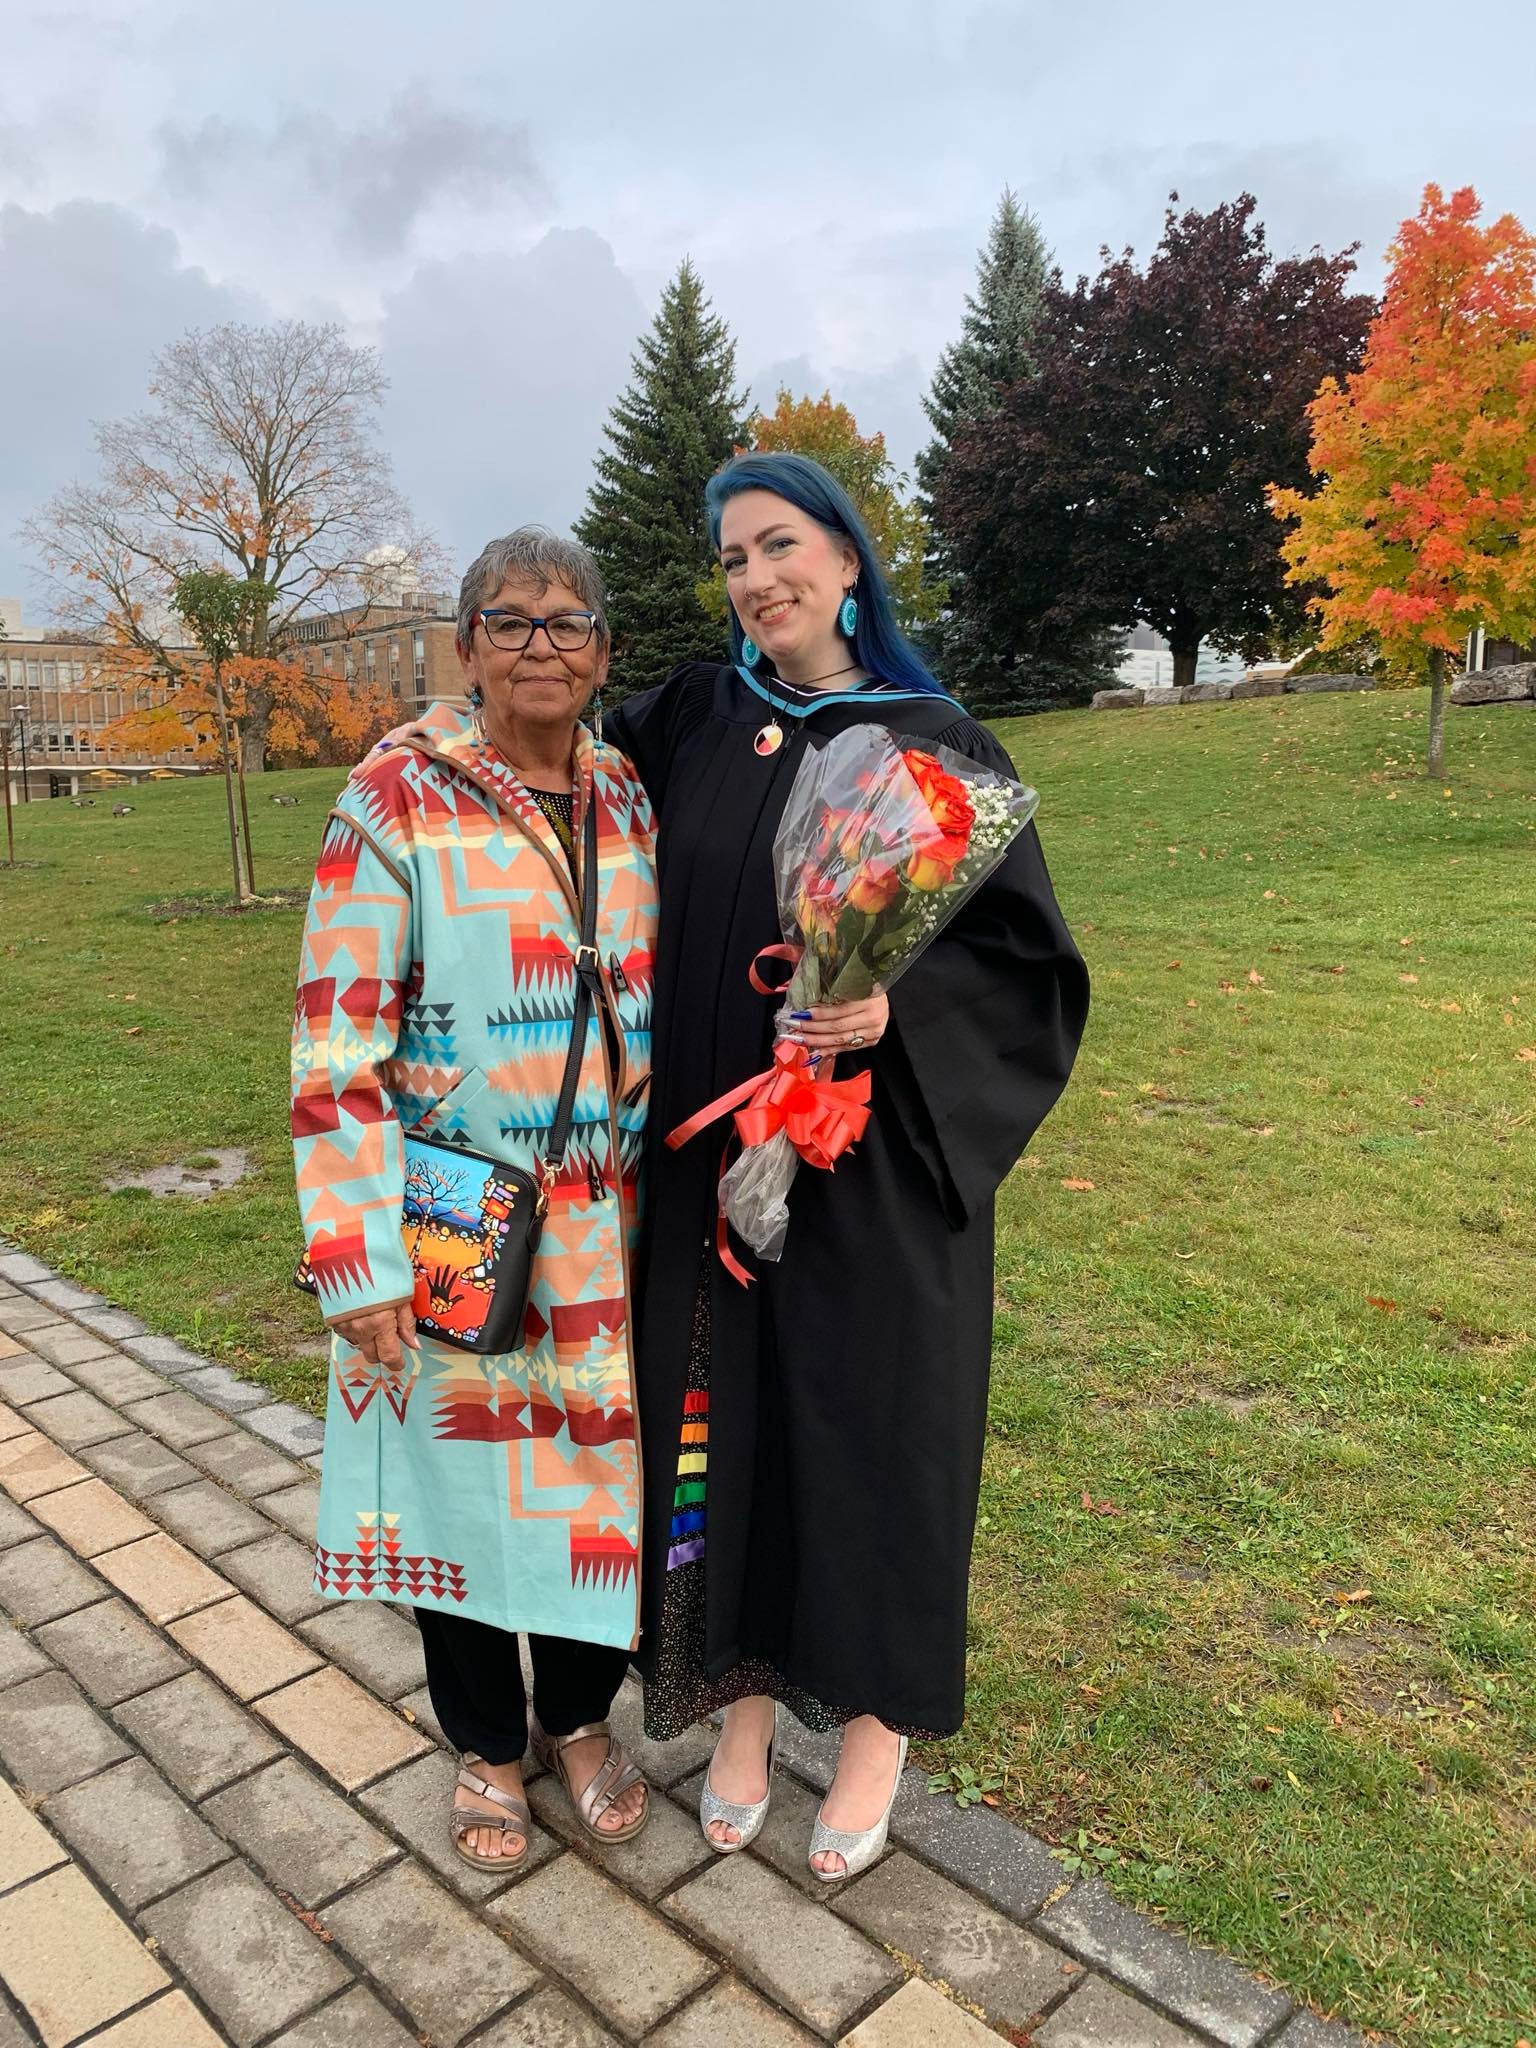 Kaylee wearing a graduation gown and holding flowers. She is standing next to her kôhkom. 